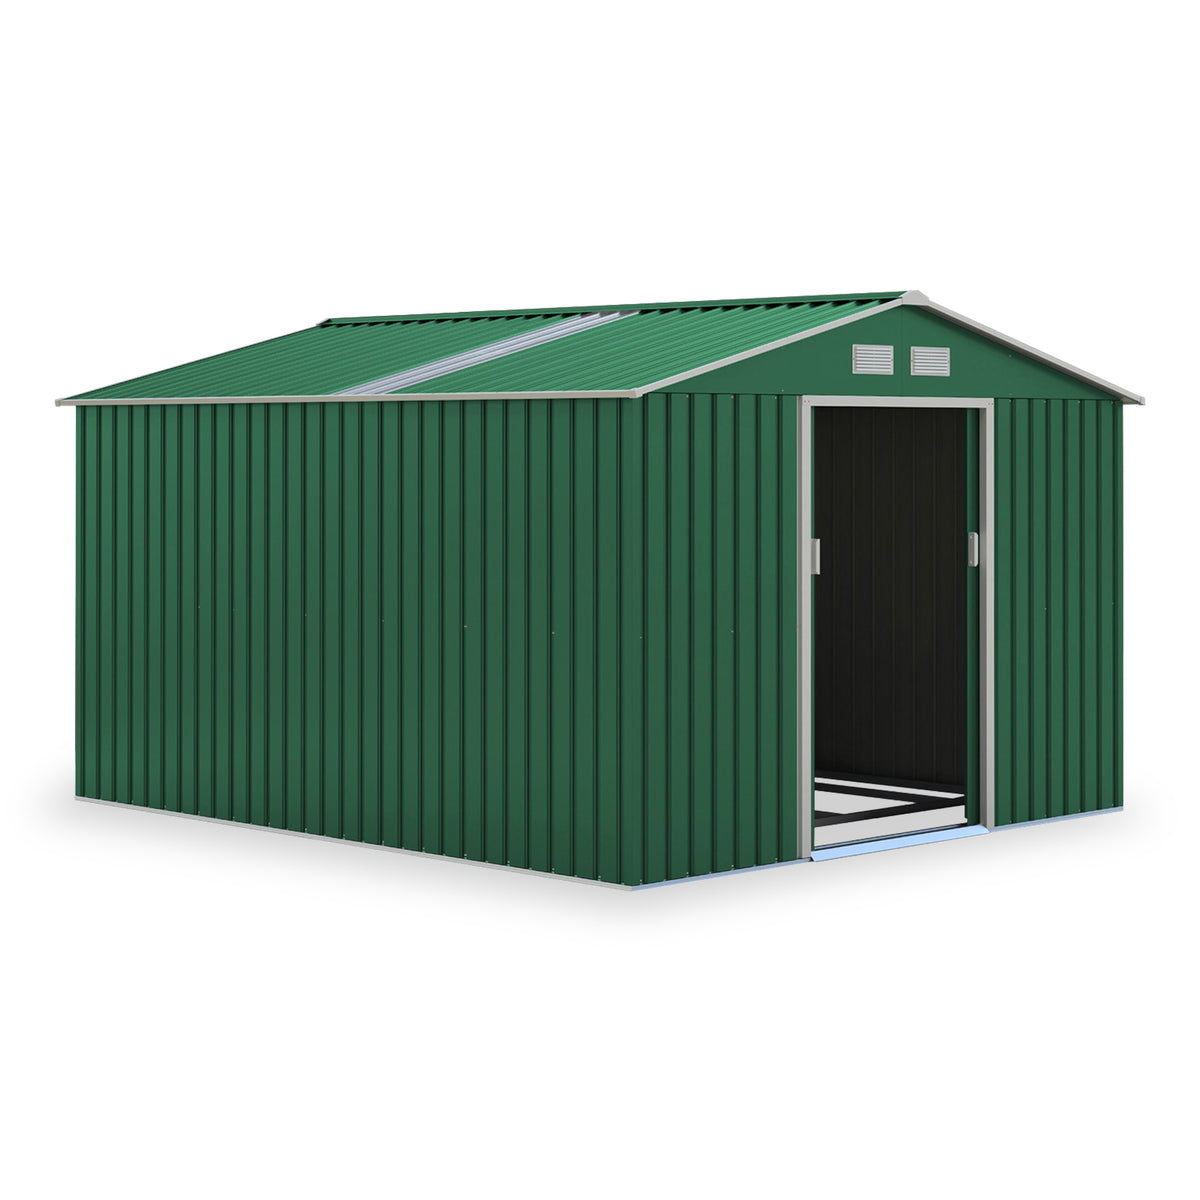 Oxford Green 9.1 x 10.5ft Galvanised Steel Shed from Roseland Furniture